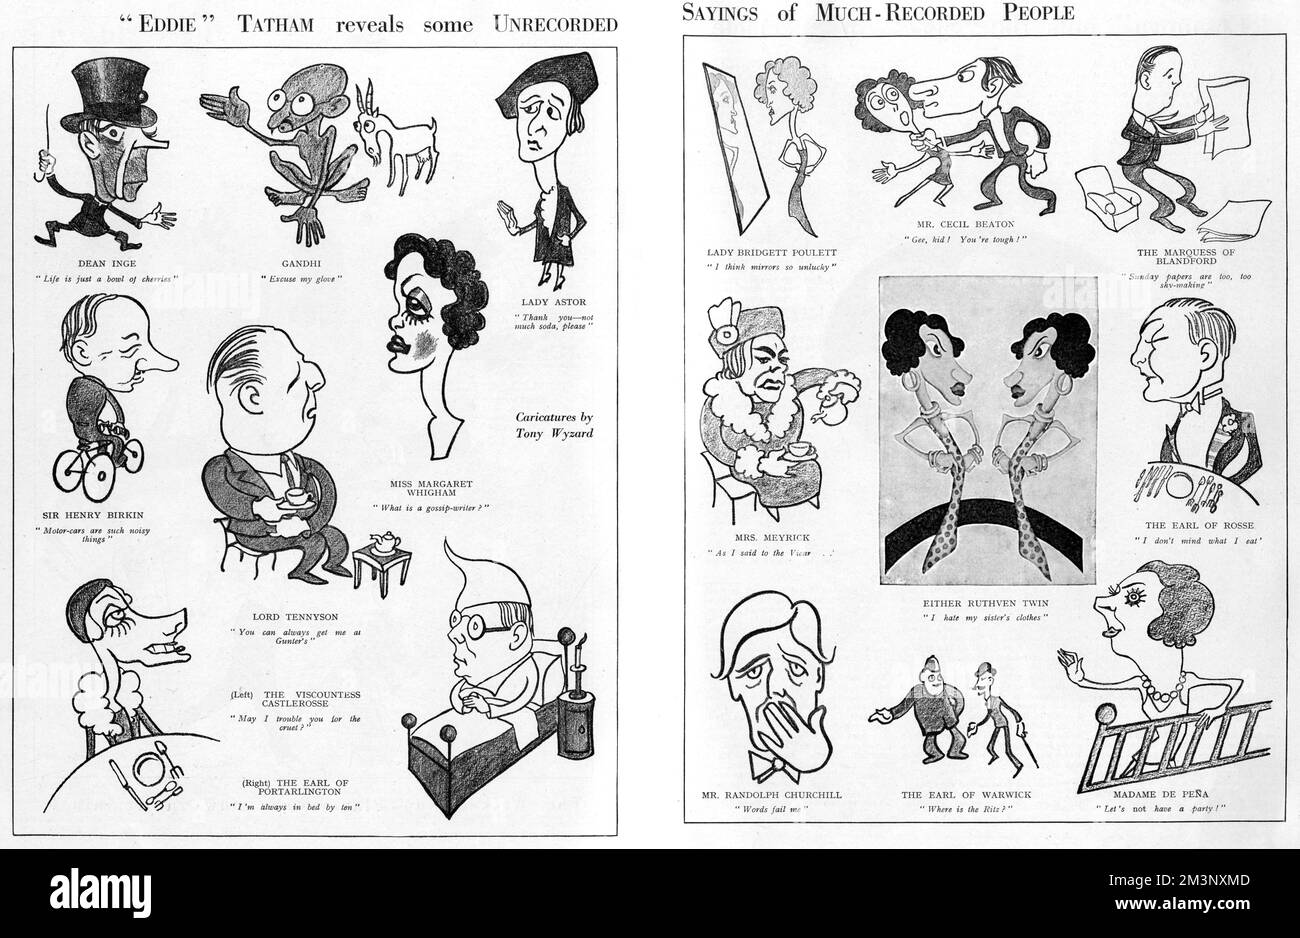 Spread from The Bystander 1932 showing some of the scions of 1930s society, and revealing some 'unrecorded sayings of much-recorded people'.  Included is Gandhi saying 'Excuse my glove', the ubiquitous Miss Margaret Whigham asking,'What is a gossip-writer?', Lady Nancy Astor saying, 'Thank you - not much soda please' (she didn't drink), Cecil Beaton saying, 'Gee kid! You're tough', the Ruthven Twins saying,'I hate my sister's clothes', notorious nightclub owner Mrs Kate Meyrick pouring a cup of tea and saying, &quot;As I said to the vicar...&quot;, Mr Randolph Churchill, saying, 'Words fail me Stock Photo